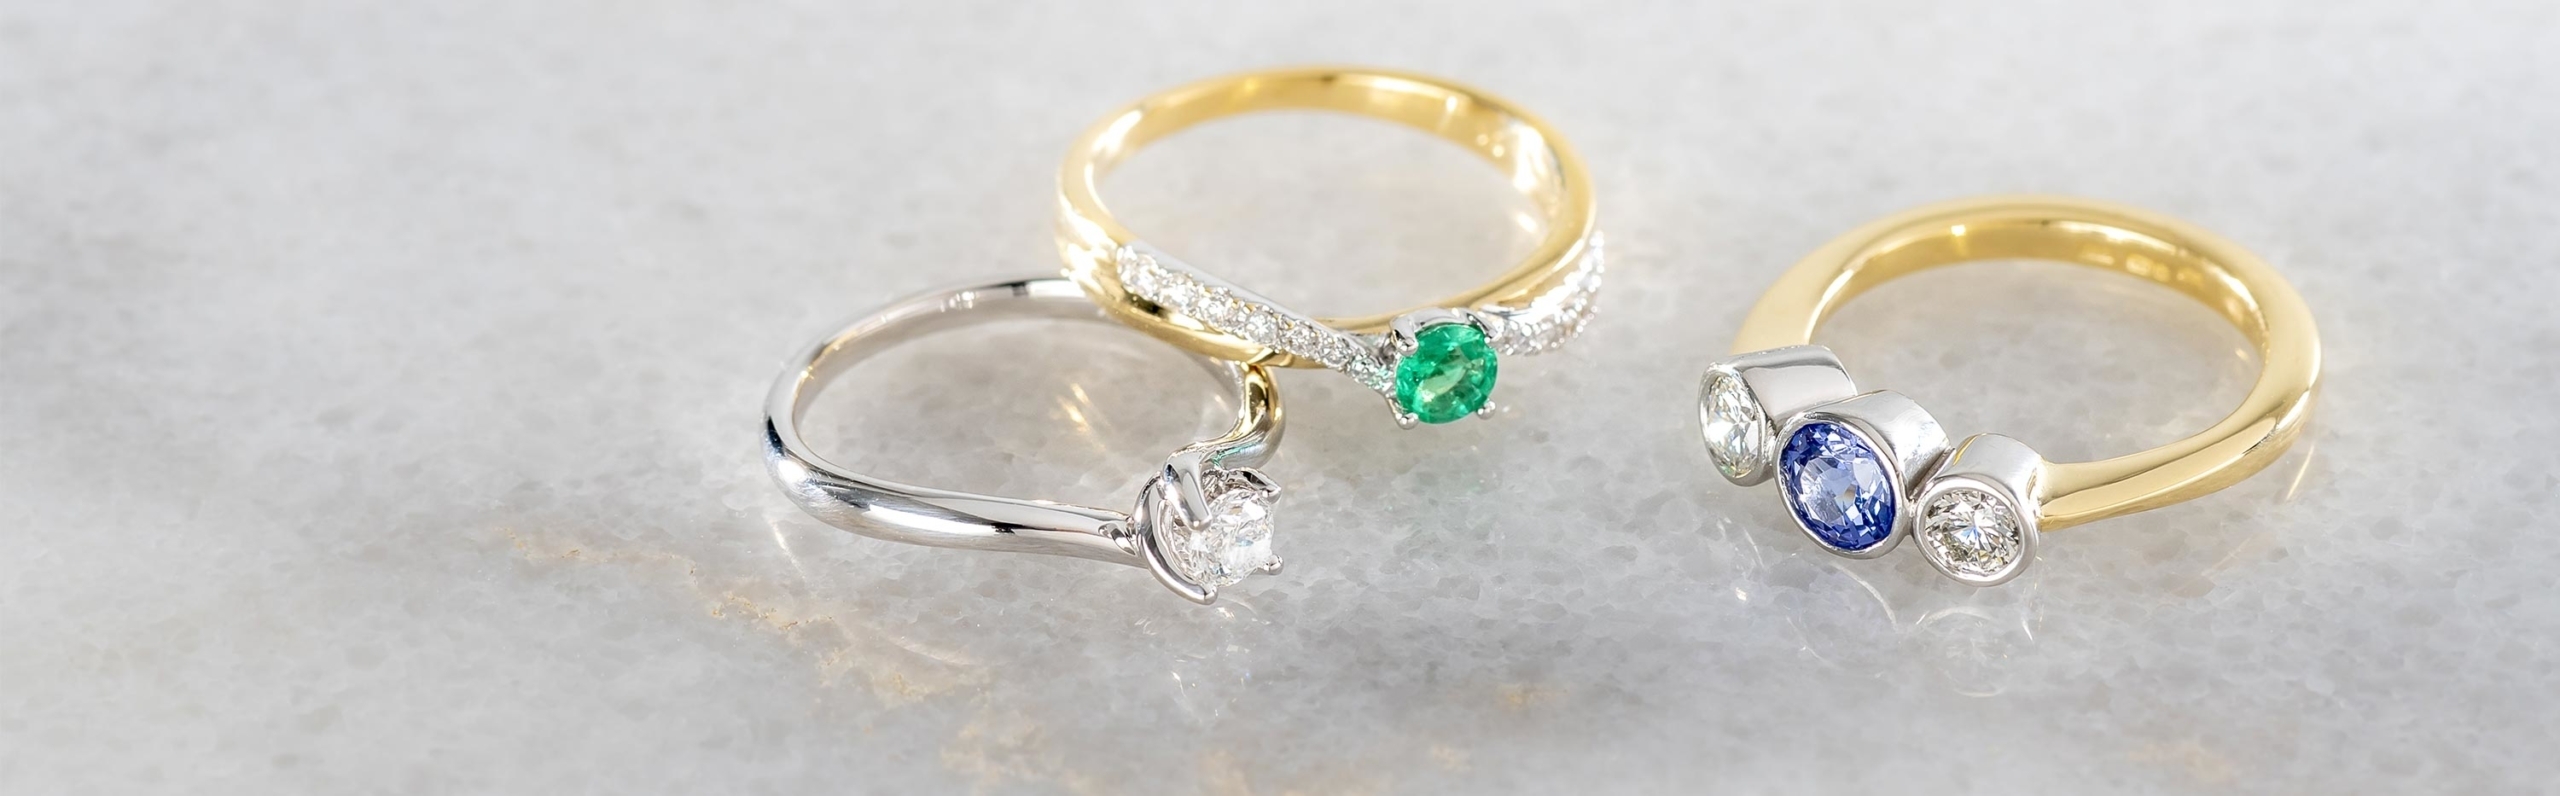 Rings - Dawes Jewellery Home Page